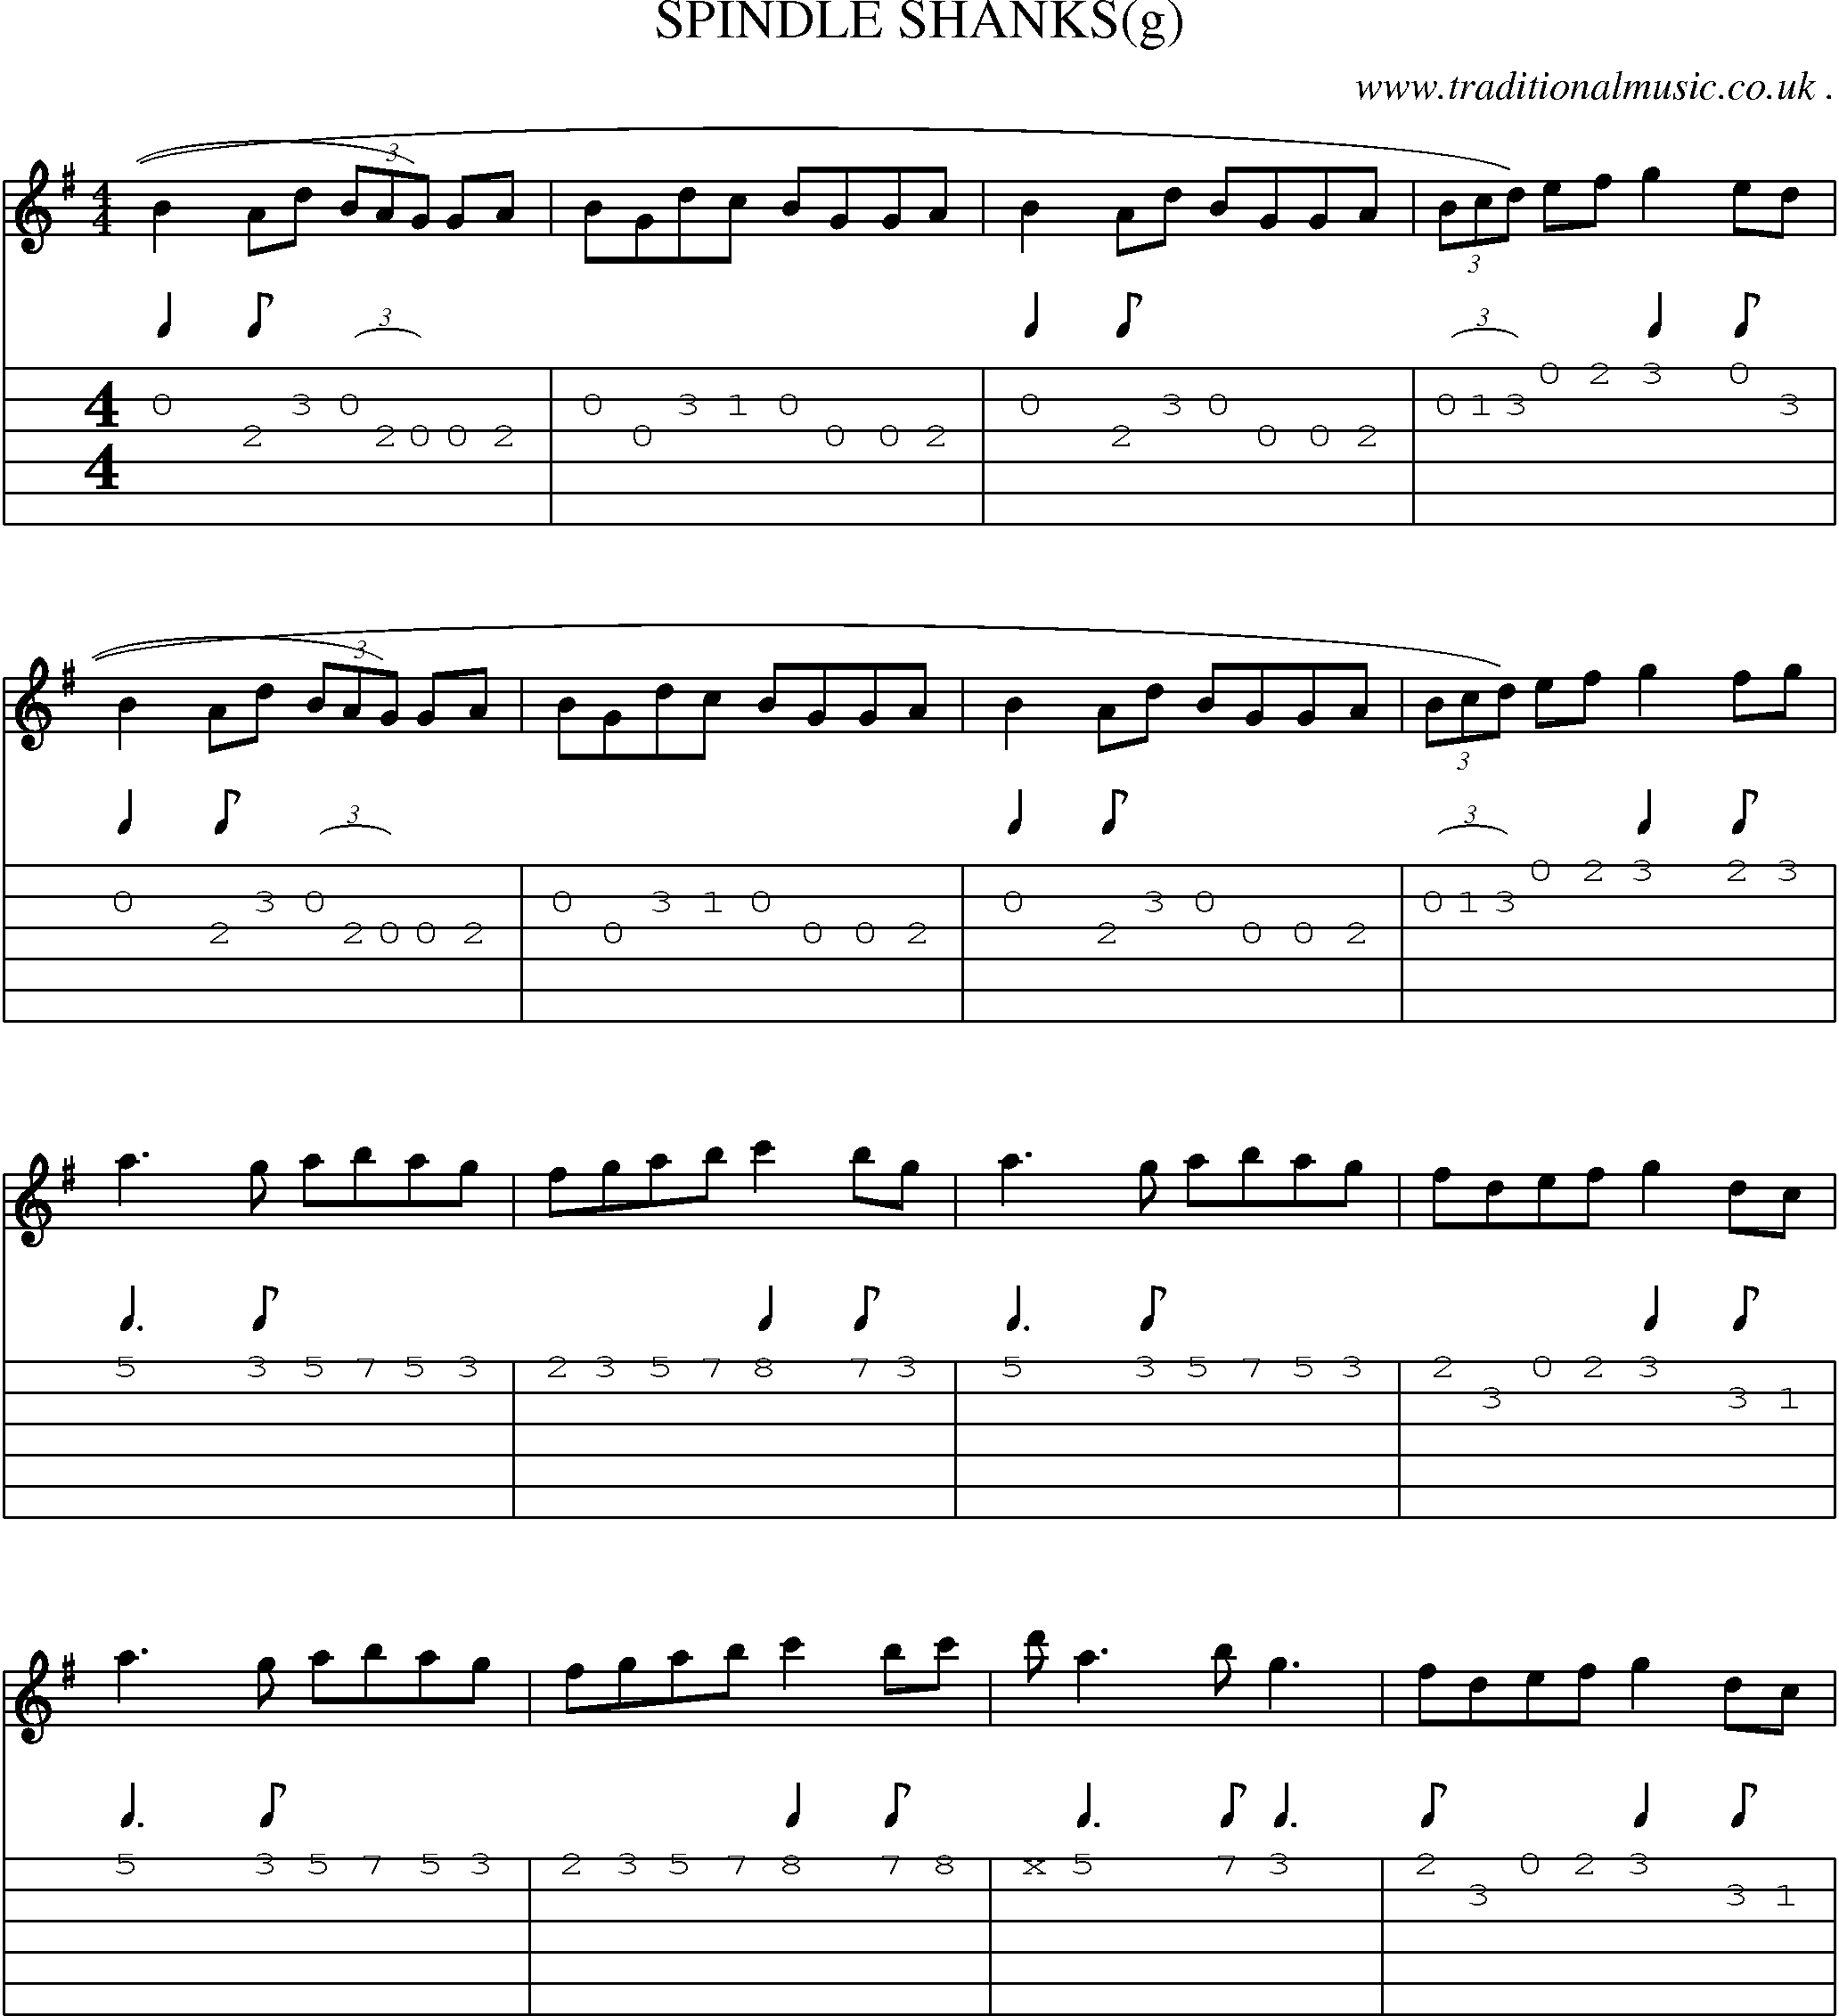 Sheet-Music and Guitar Tabs for Spindle Shanks(g)